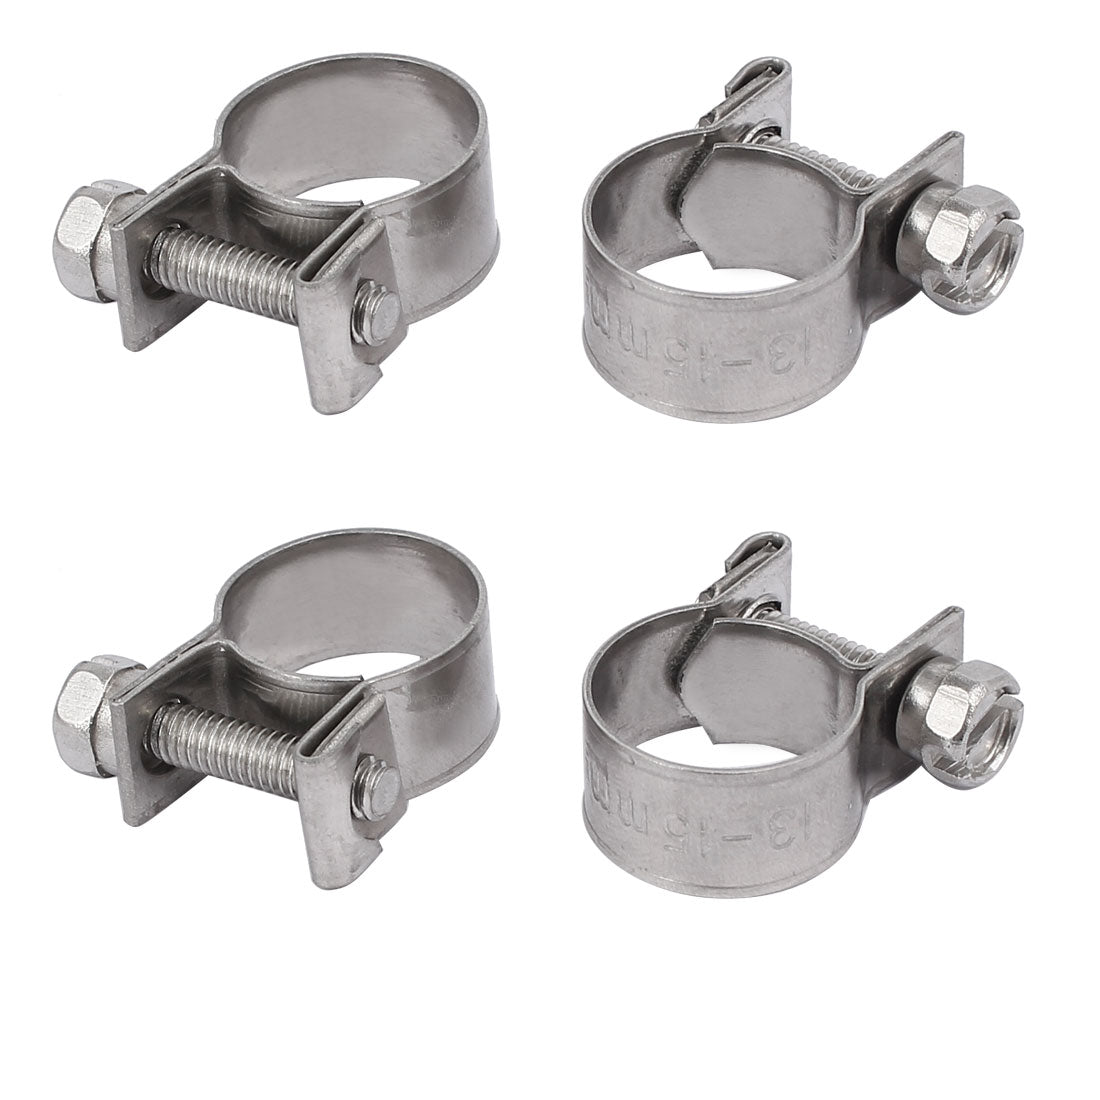 uxcell Uxcell 13mm-15mm 304 Stainless Steel Screw Mounted Adjustable Pipe Hose Clamps 4pcs